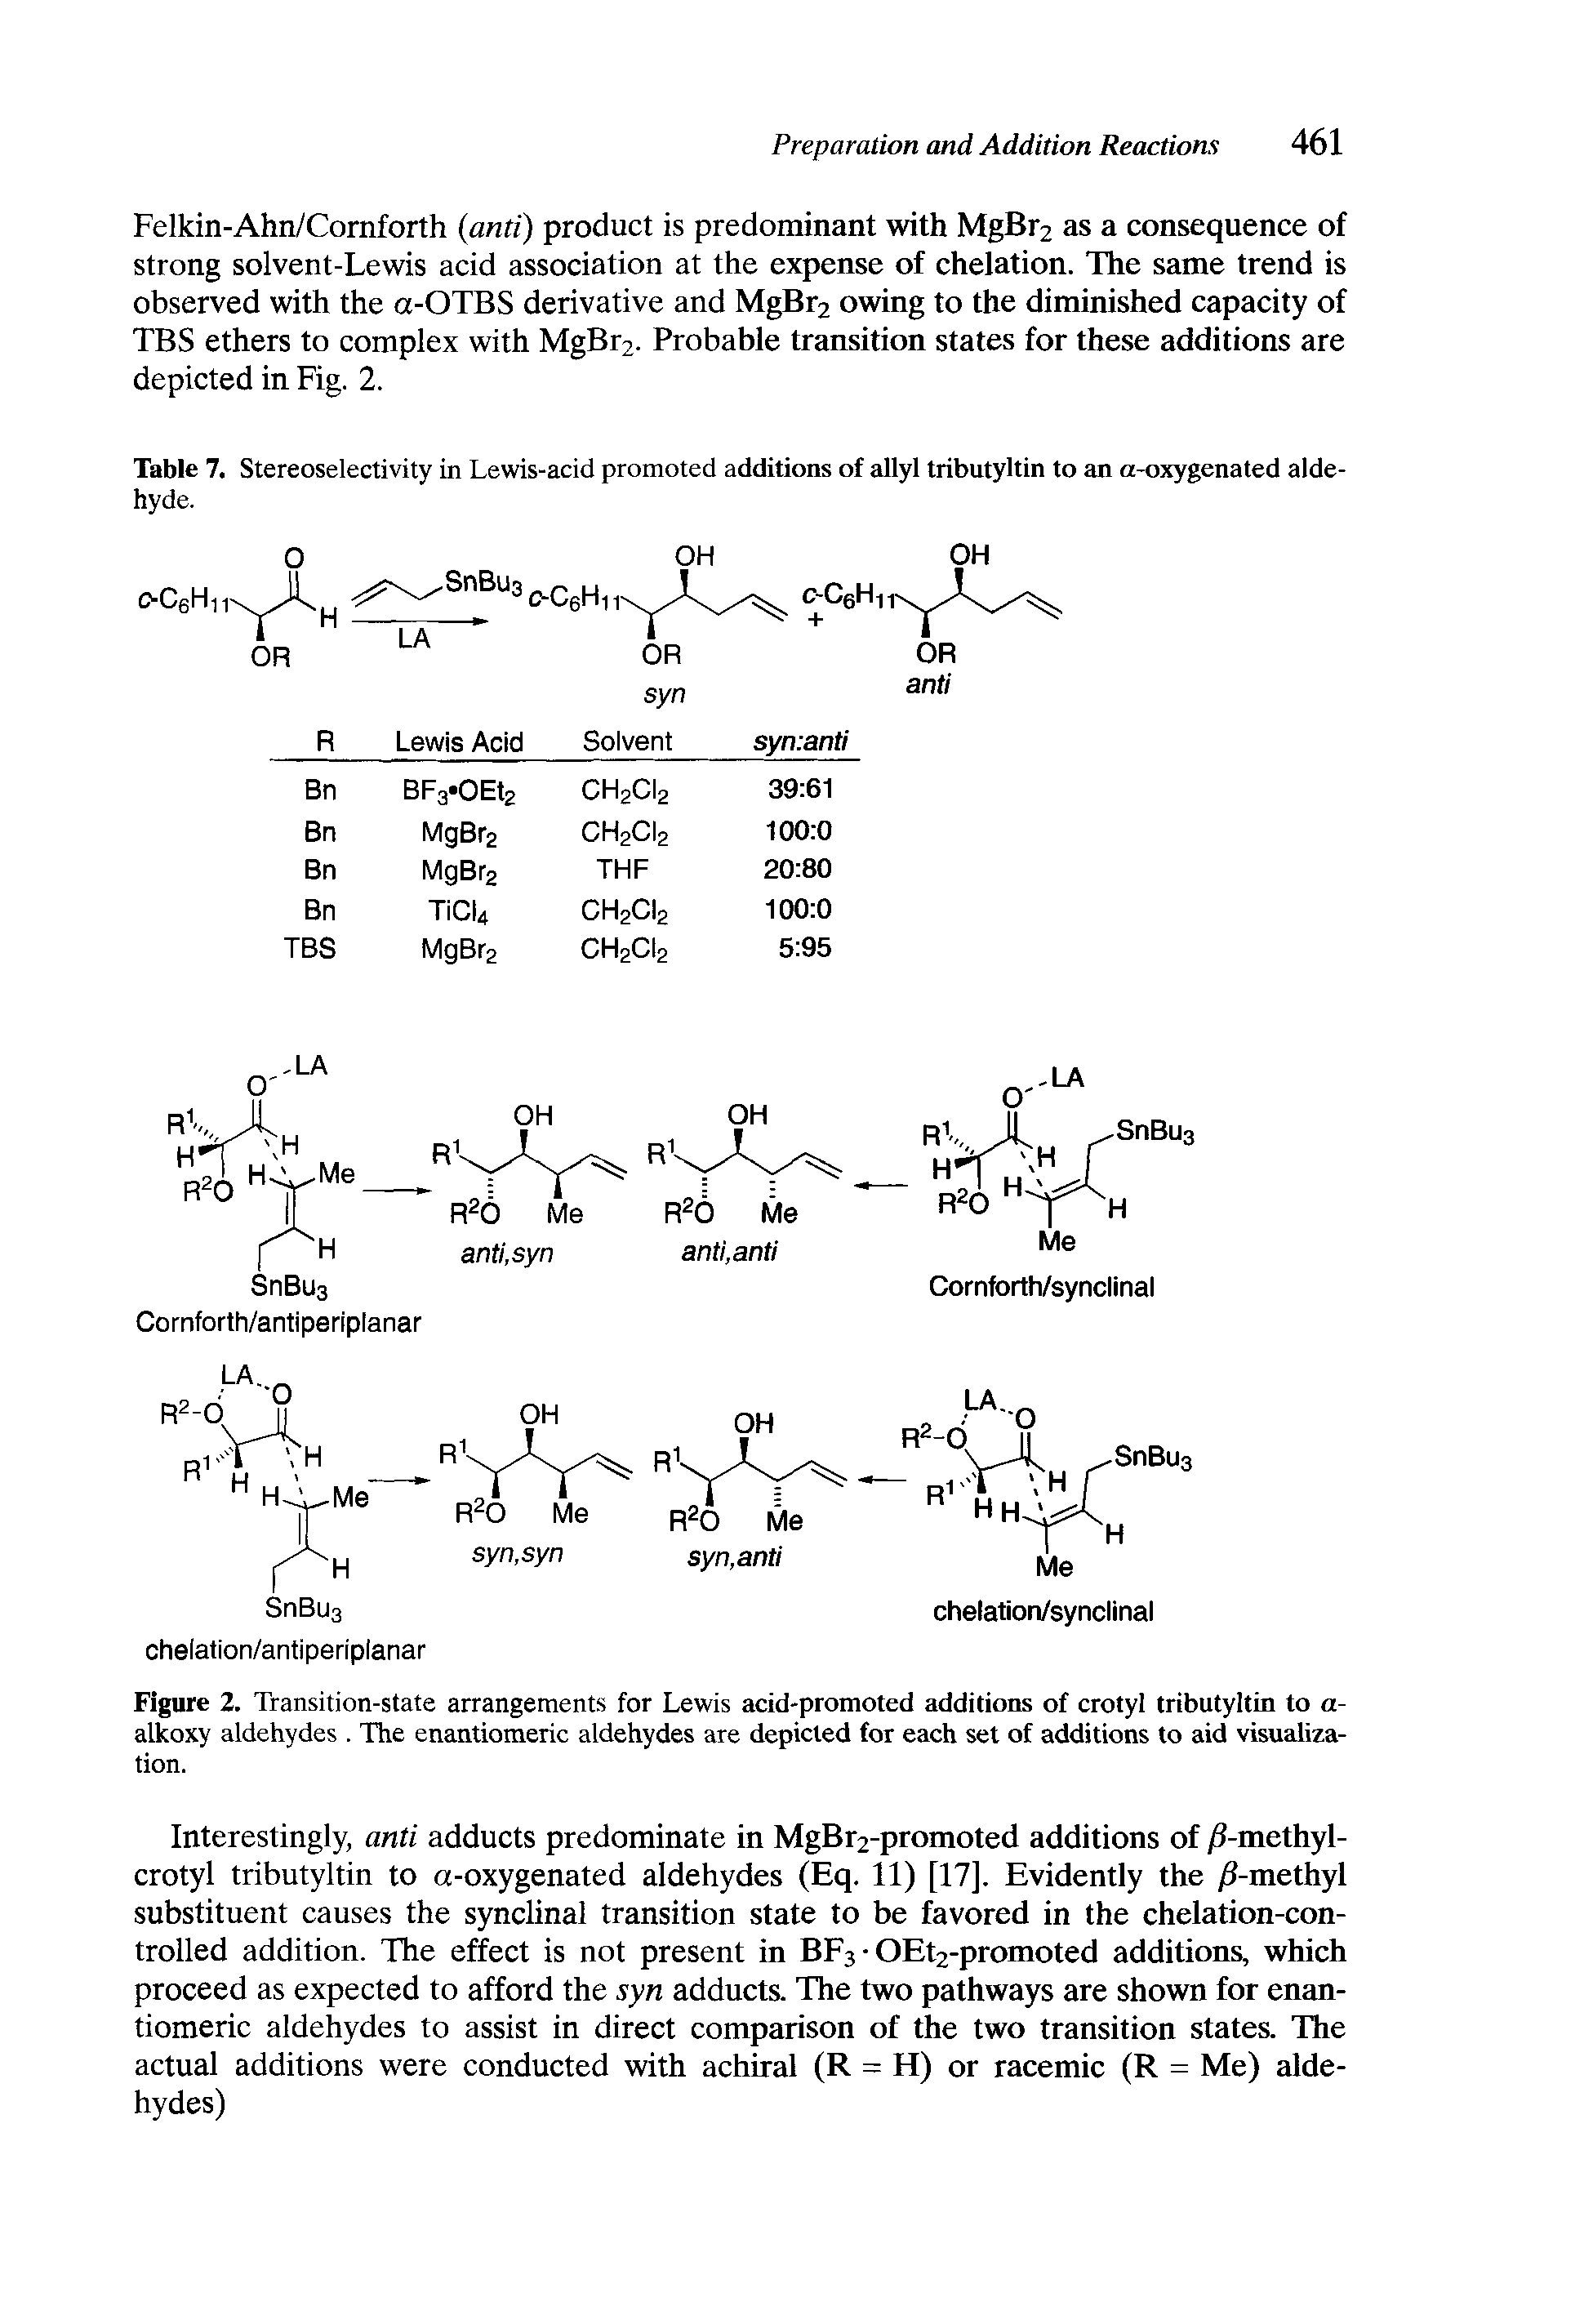 Table 7. Stereoselectivity in Lewis-acid promoted additions of allyl tributyltin to an a-oxygenated aldehyde.